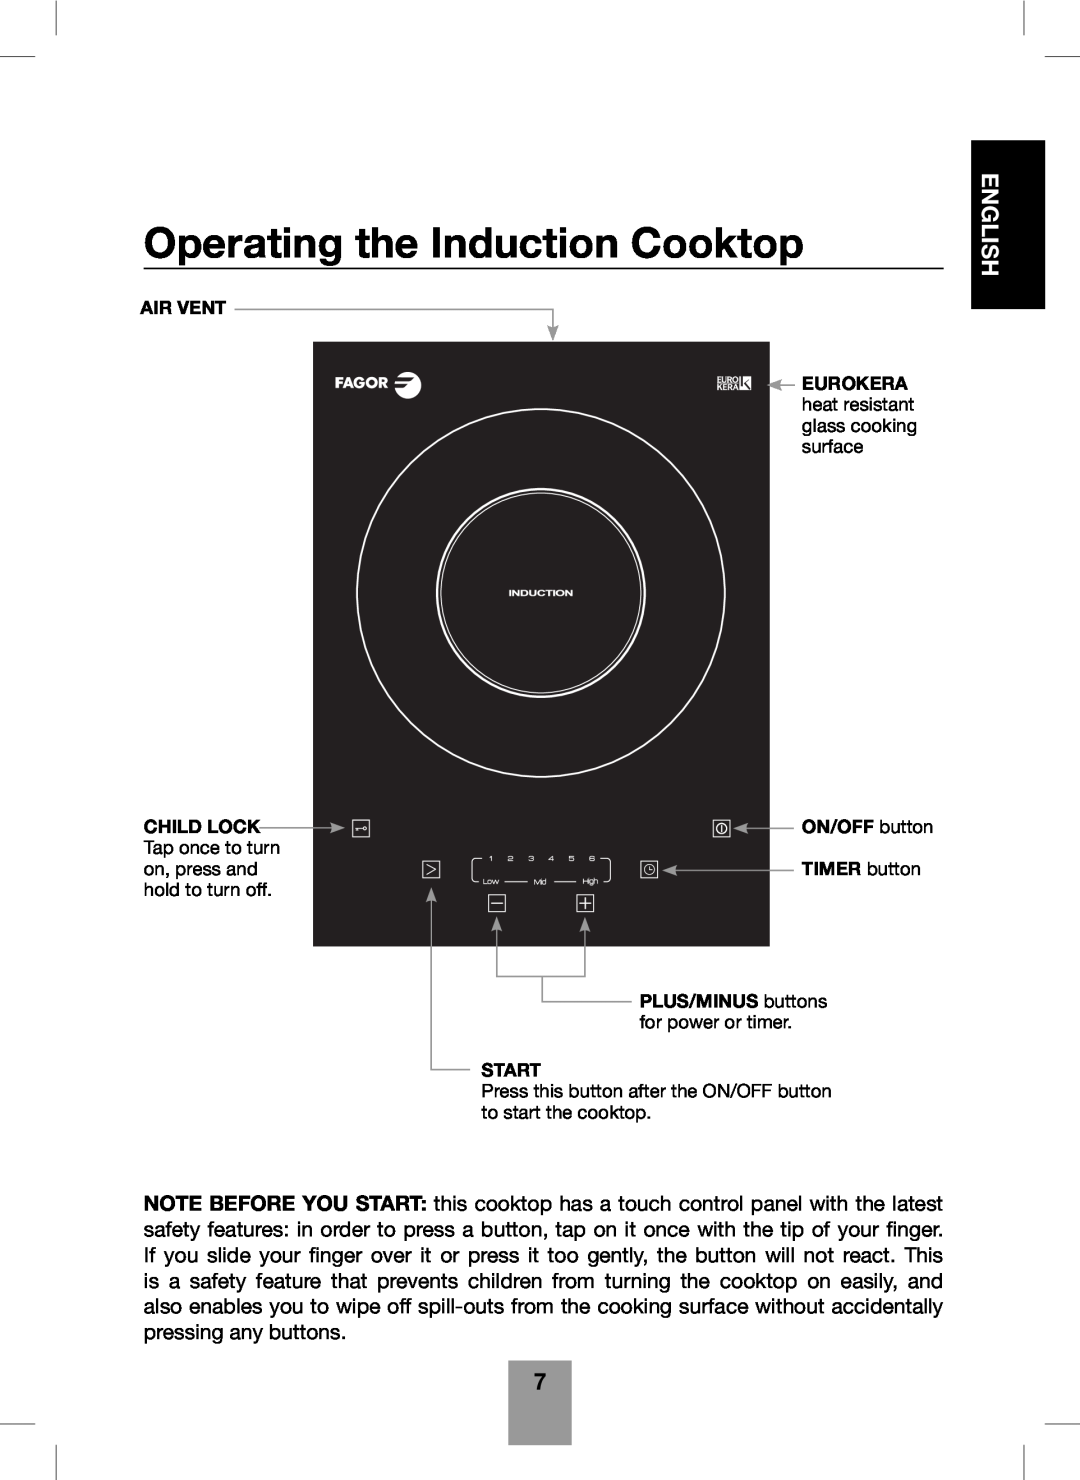 Fagor America Portable Induction Cooktop Operating the Induction Cooktop, English, Child Lock, ON/OFF button, TIMER button 